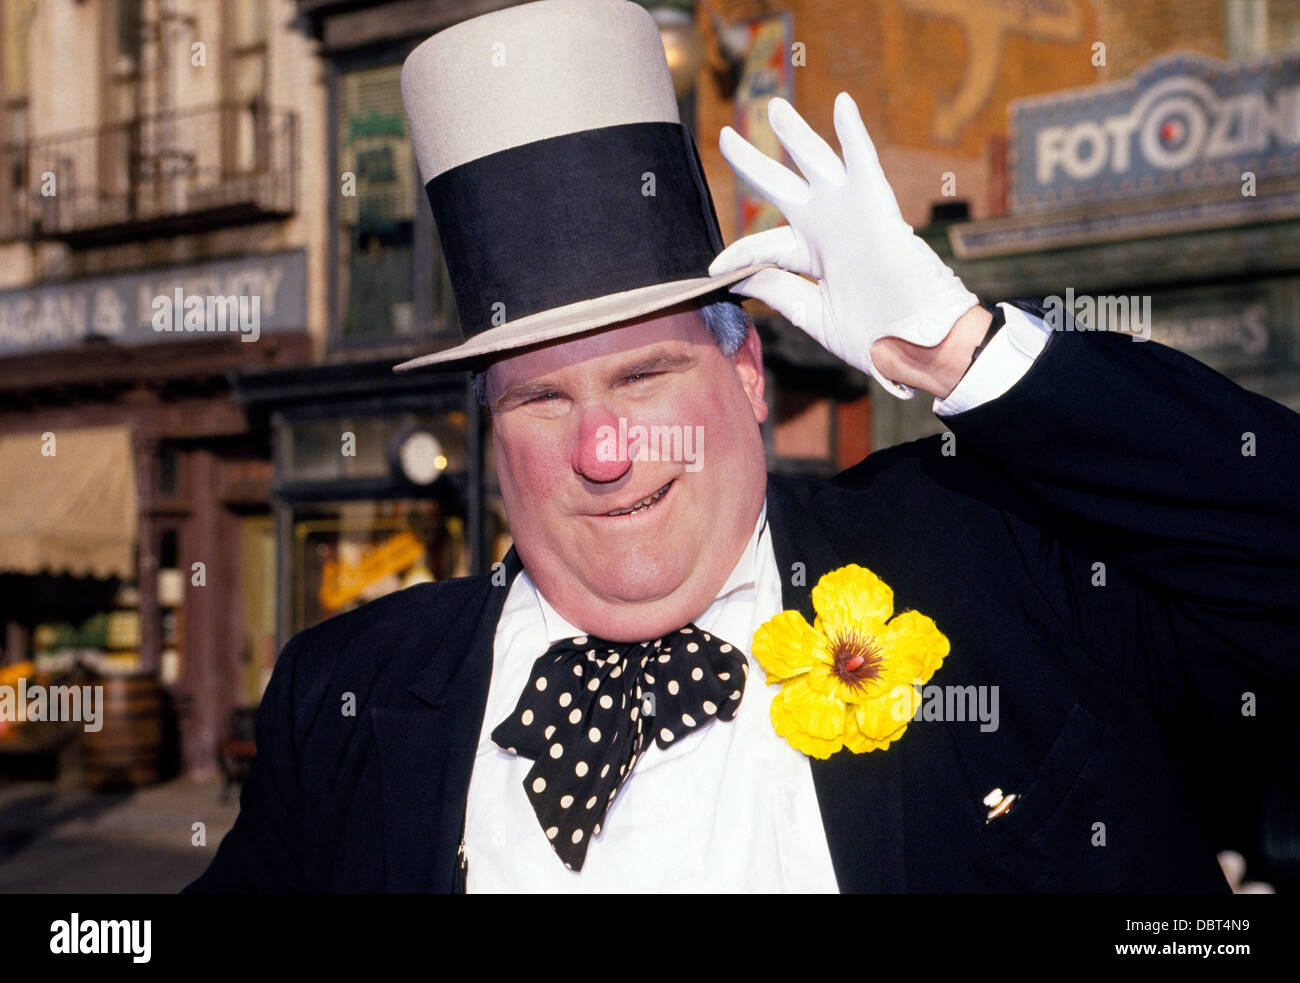 Comedian W.C. Fields is among past movie stars played by character actors roaming the Universal Studios theme park in Hollywood, California, USA. Stock Photo